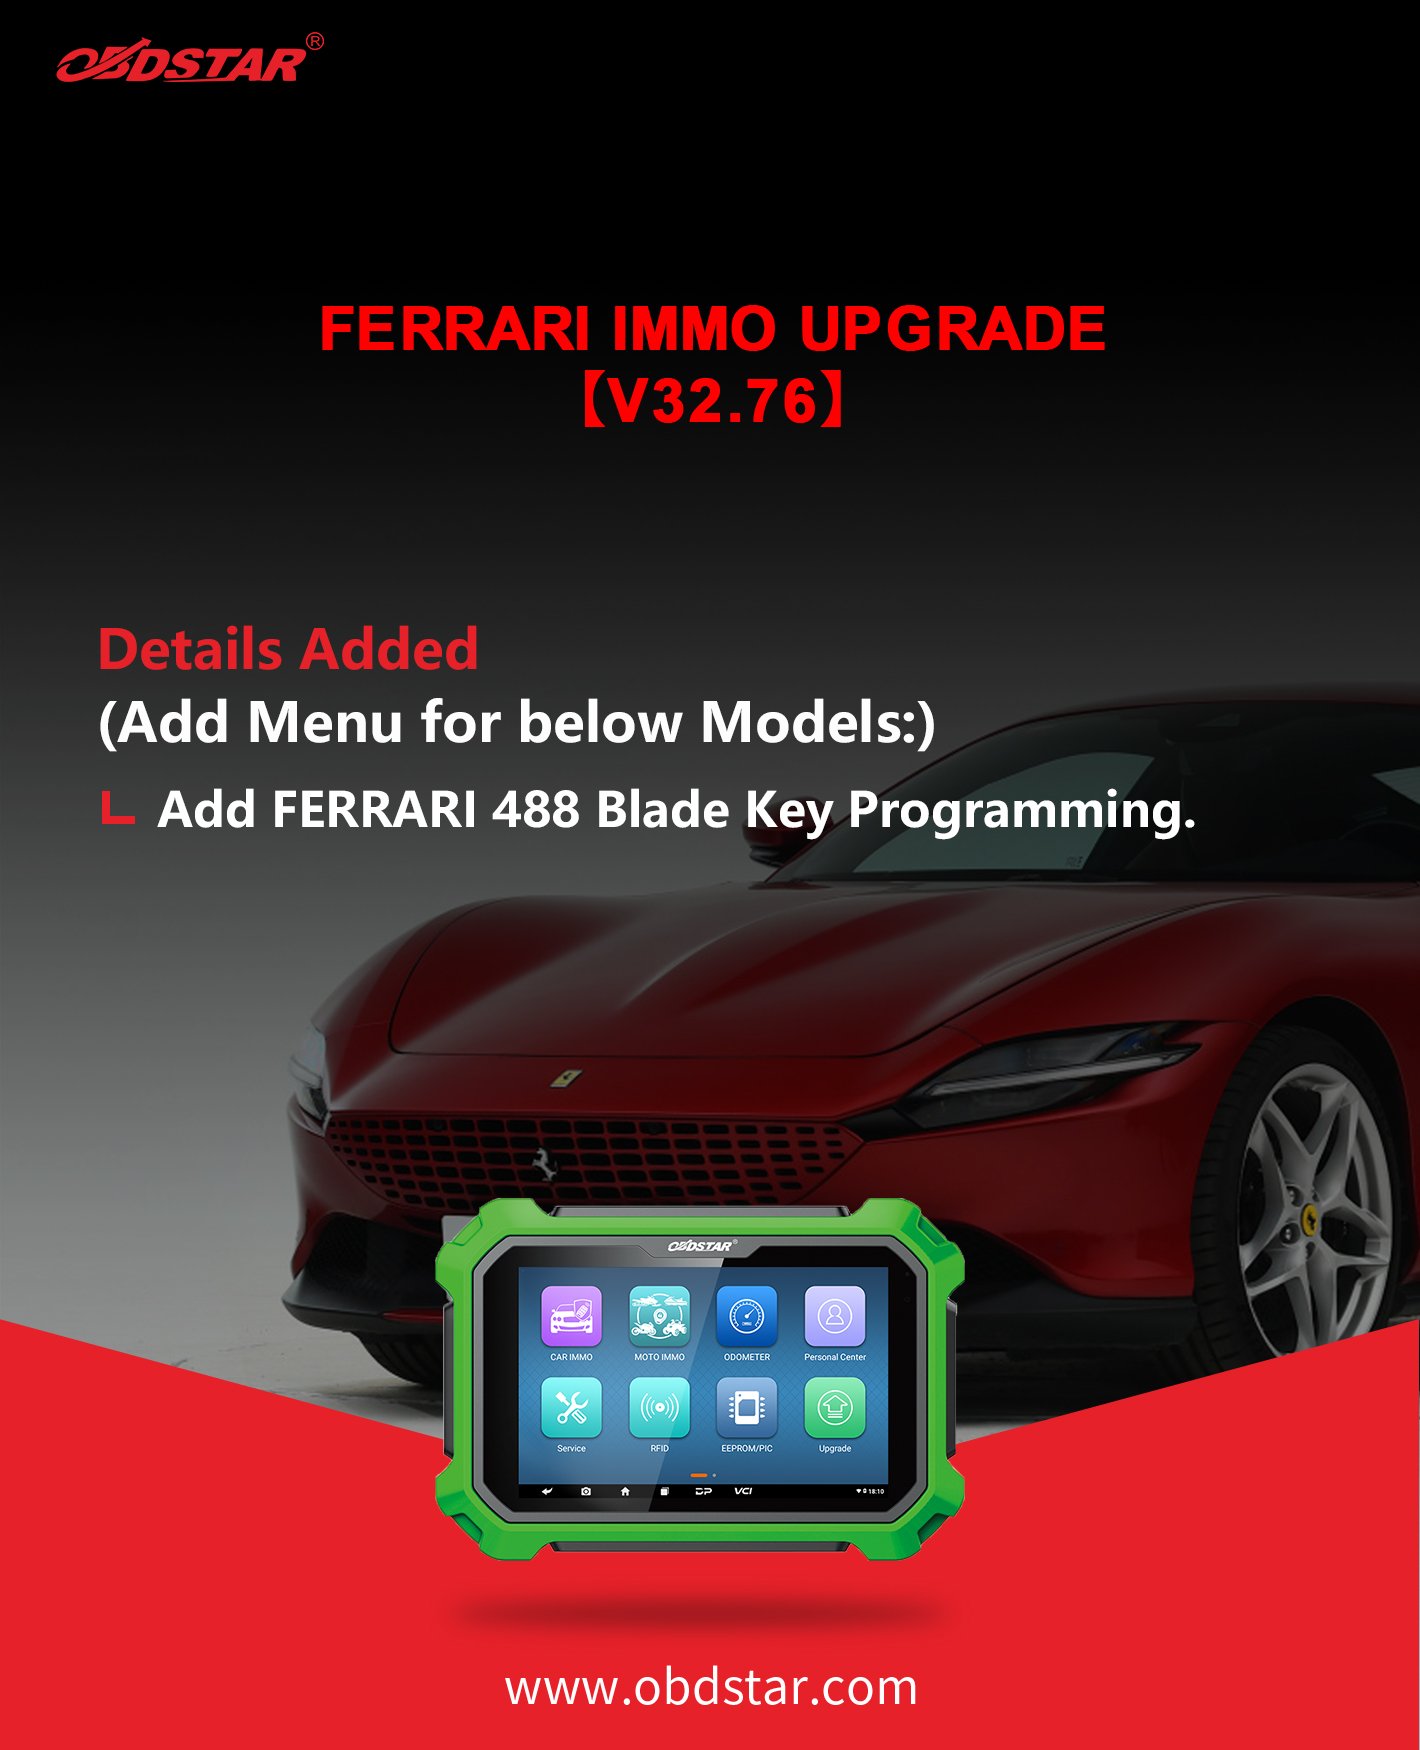 Ferrari [V32.76] IMMO Upgrade on OBDSTAR X300 DP Plus and X300 DP and X300 Pro4